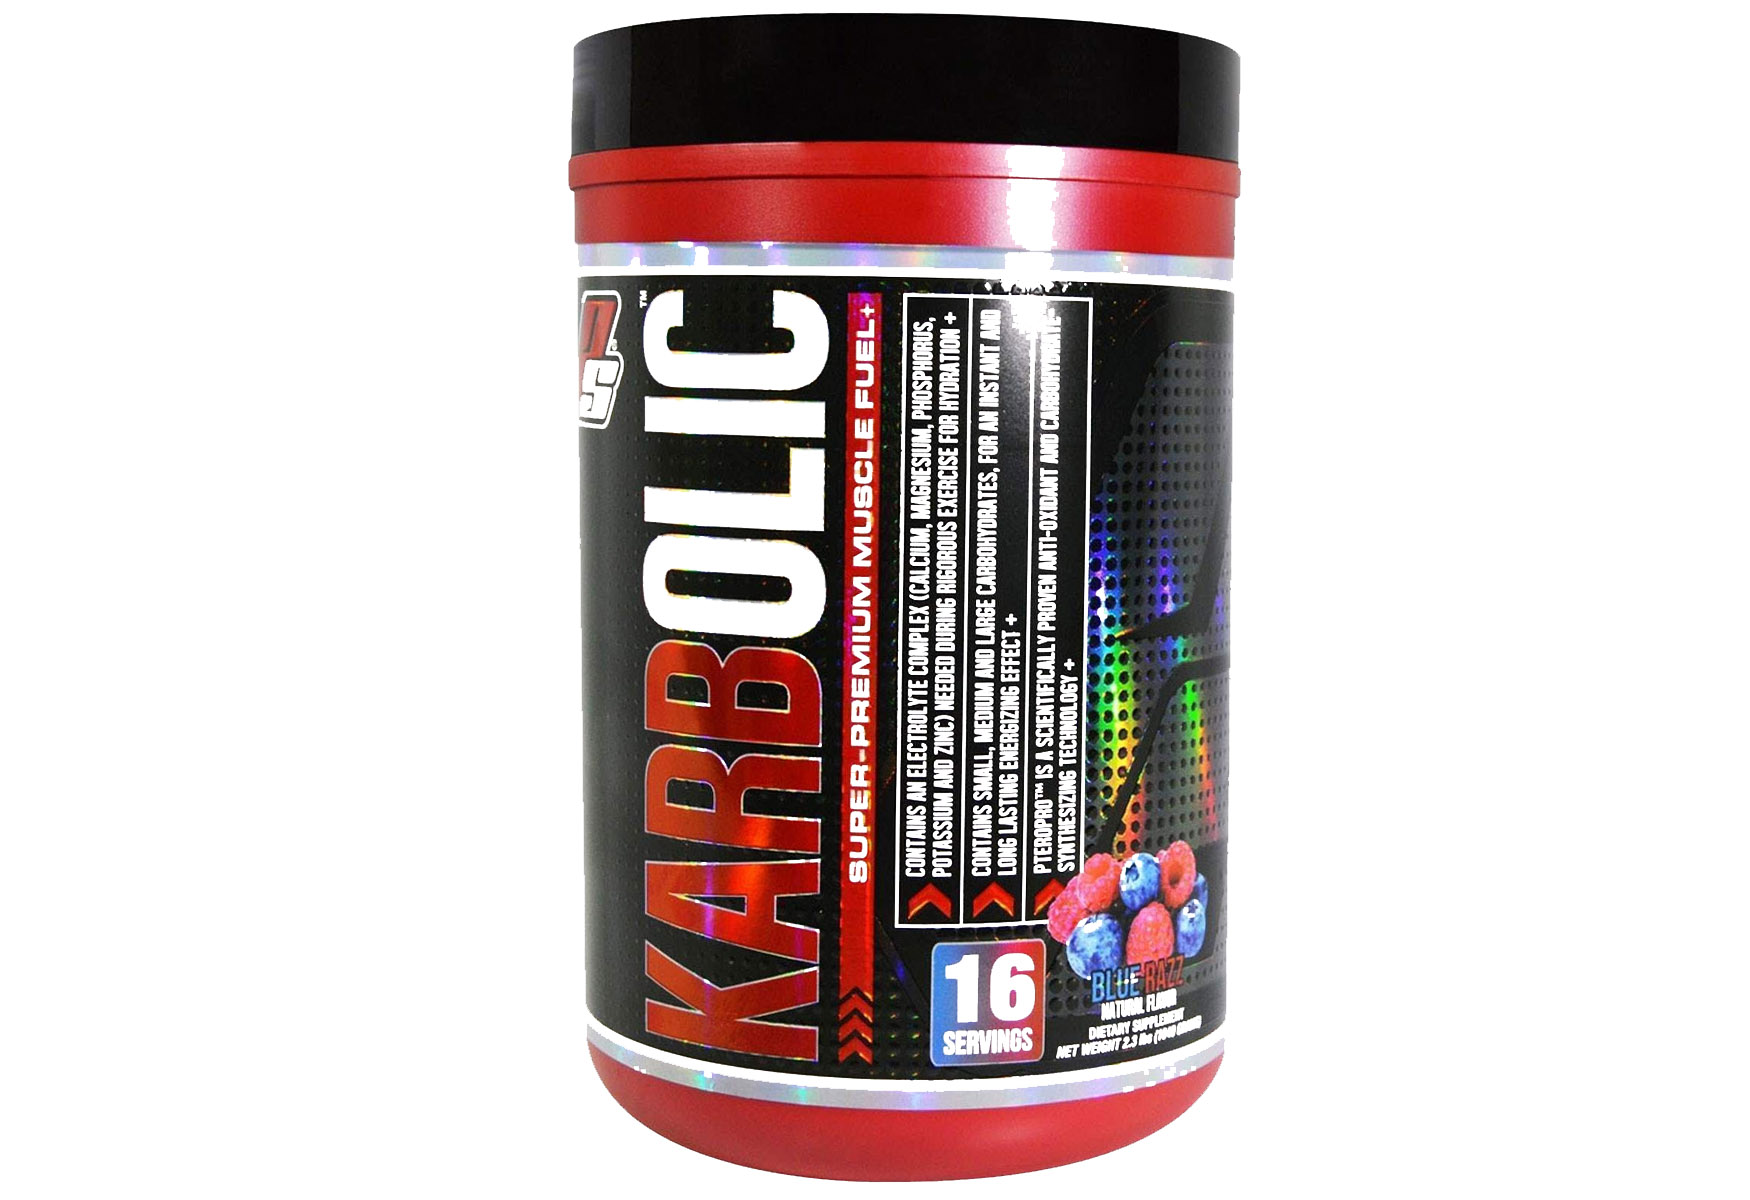 19-karbolic-nutrition-facts